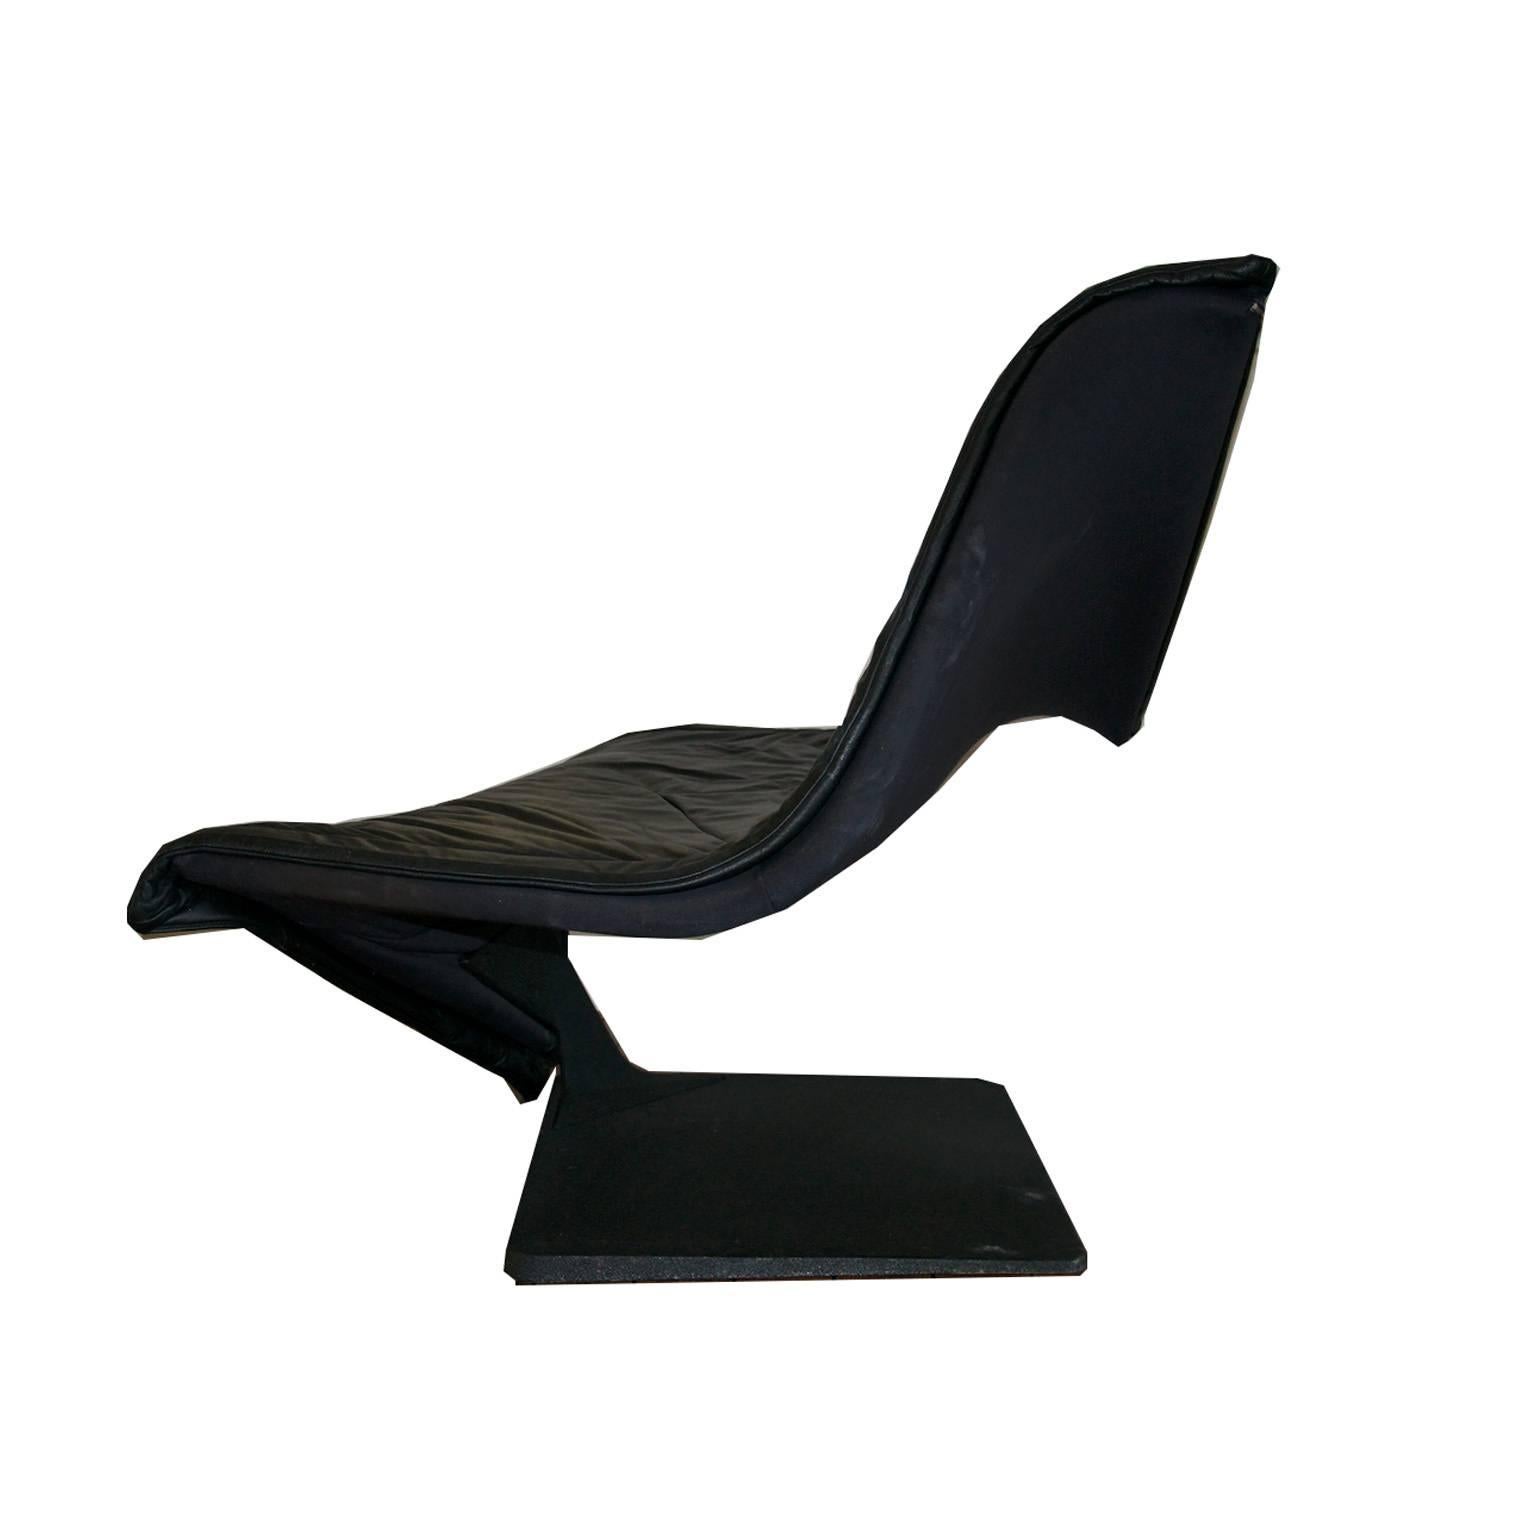 The flying carpet chair by Simon Desanta for Rosenthal, designed in 1988.

With its elegant floating shape it is clear why it is called the flying carpet. The chair has a beautiful black leather upholstery and is in very good condition. The foot